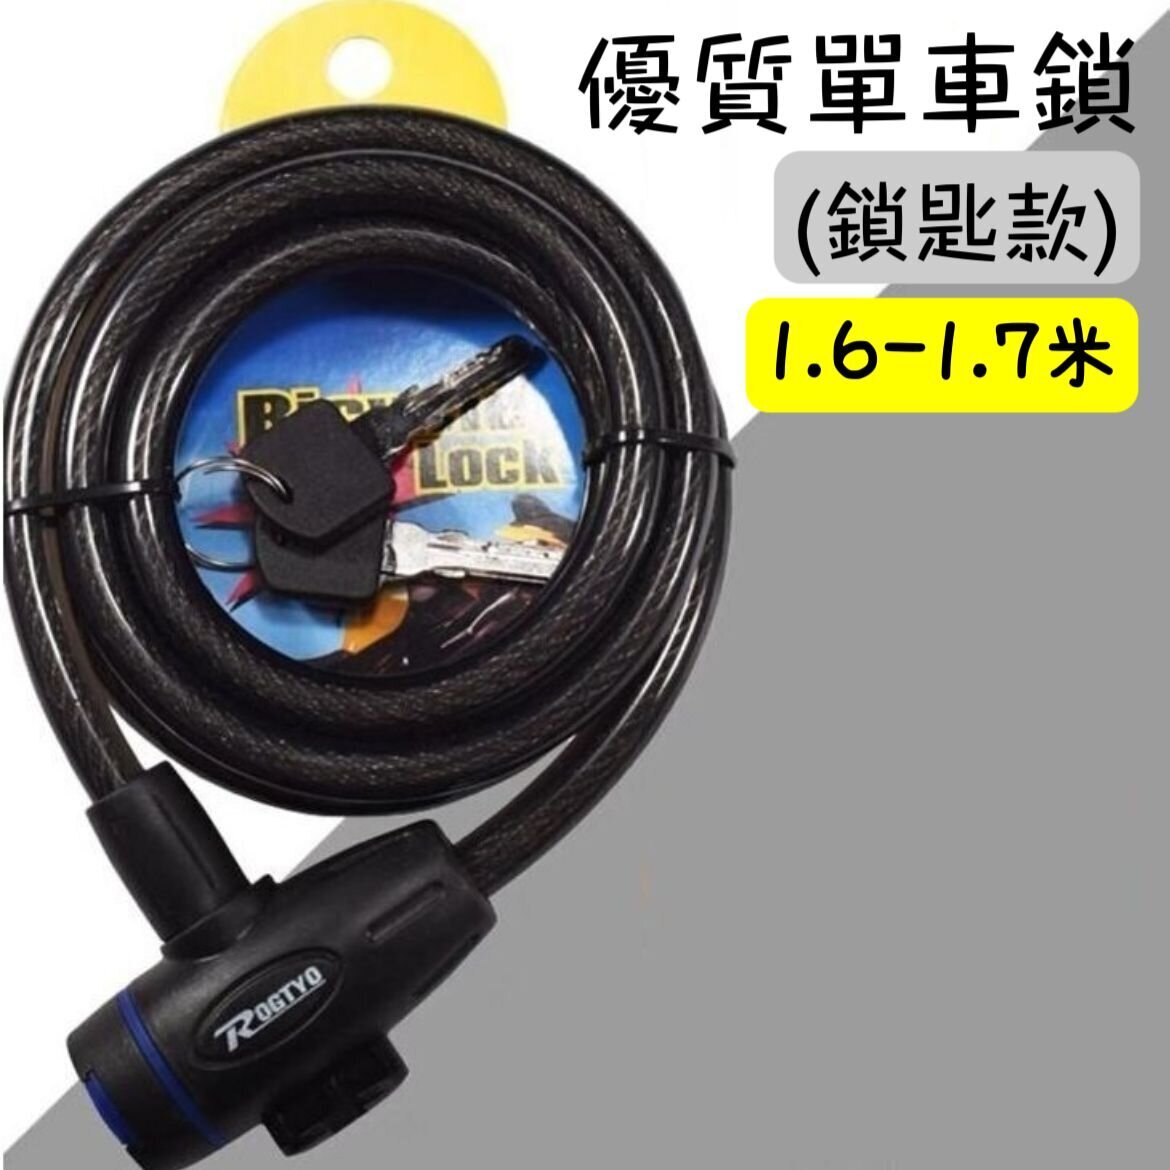 1.6-1.7m Hiigh quality bicycle anti-theft wire bicycle lock (Key type) (Random packaging and color)